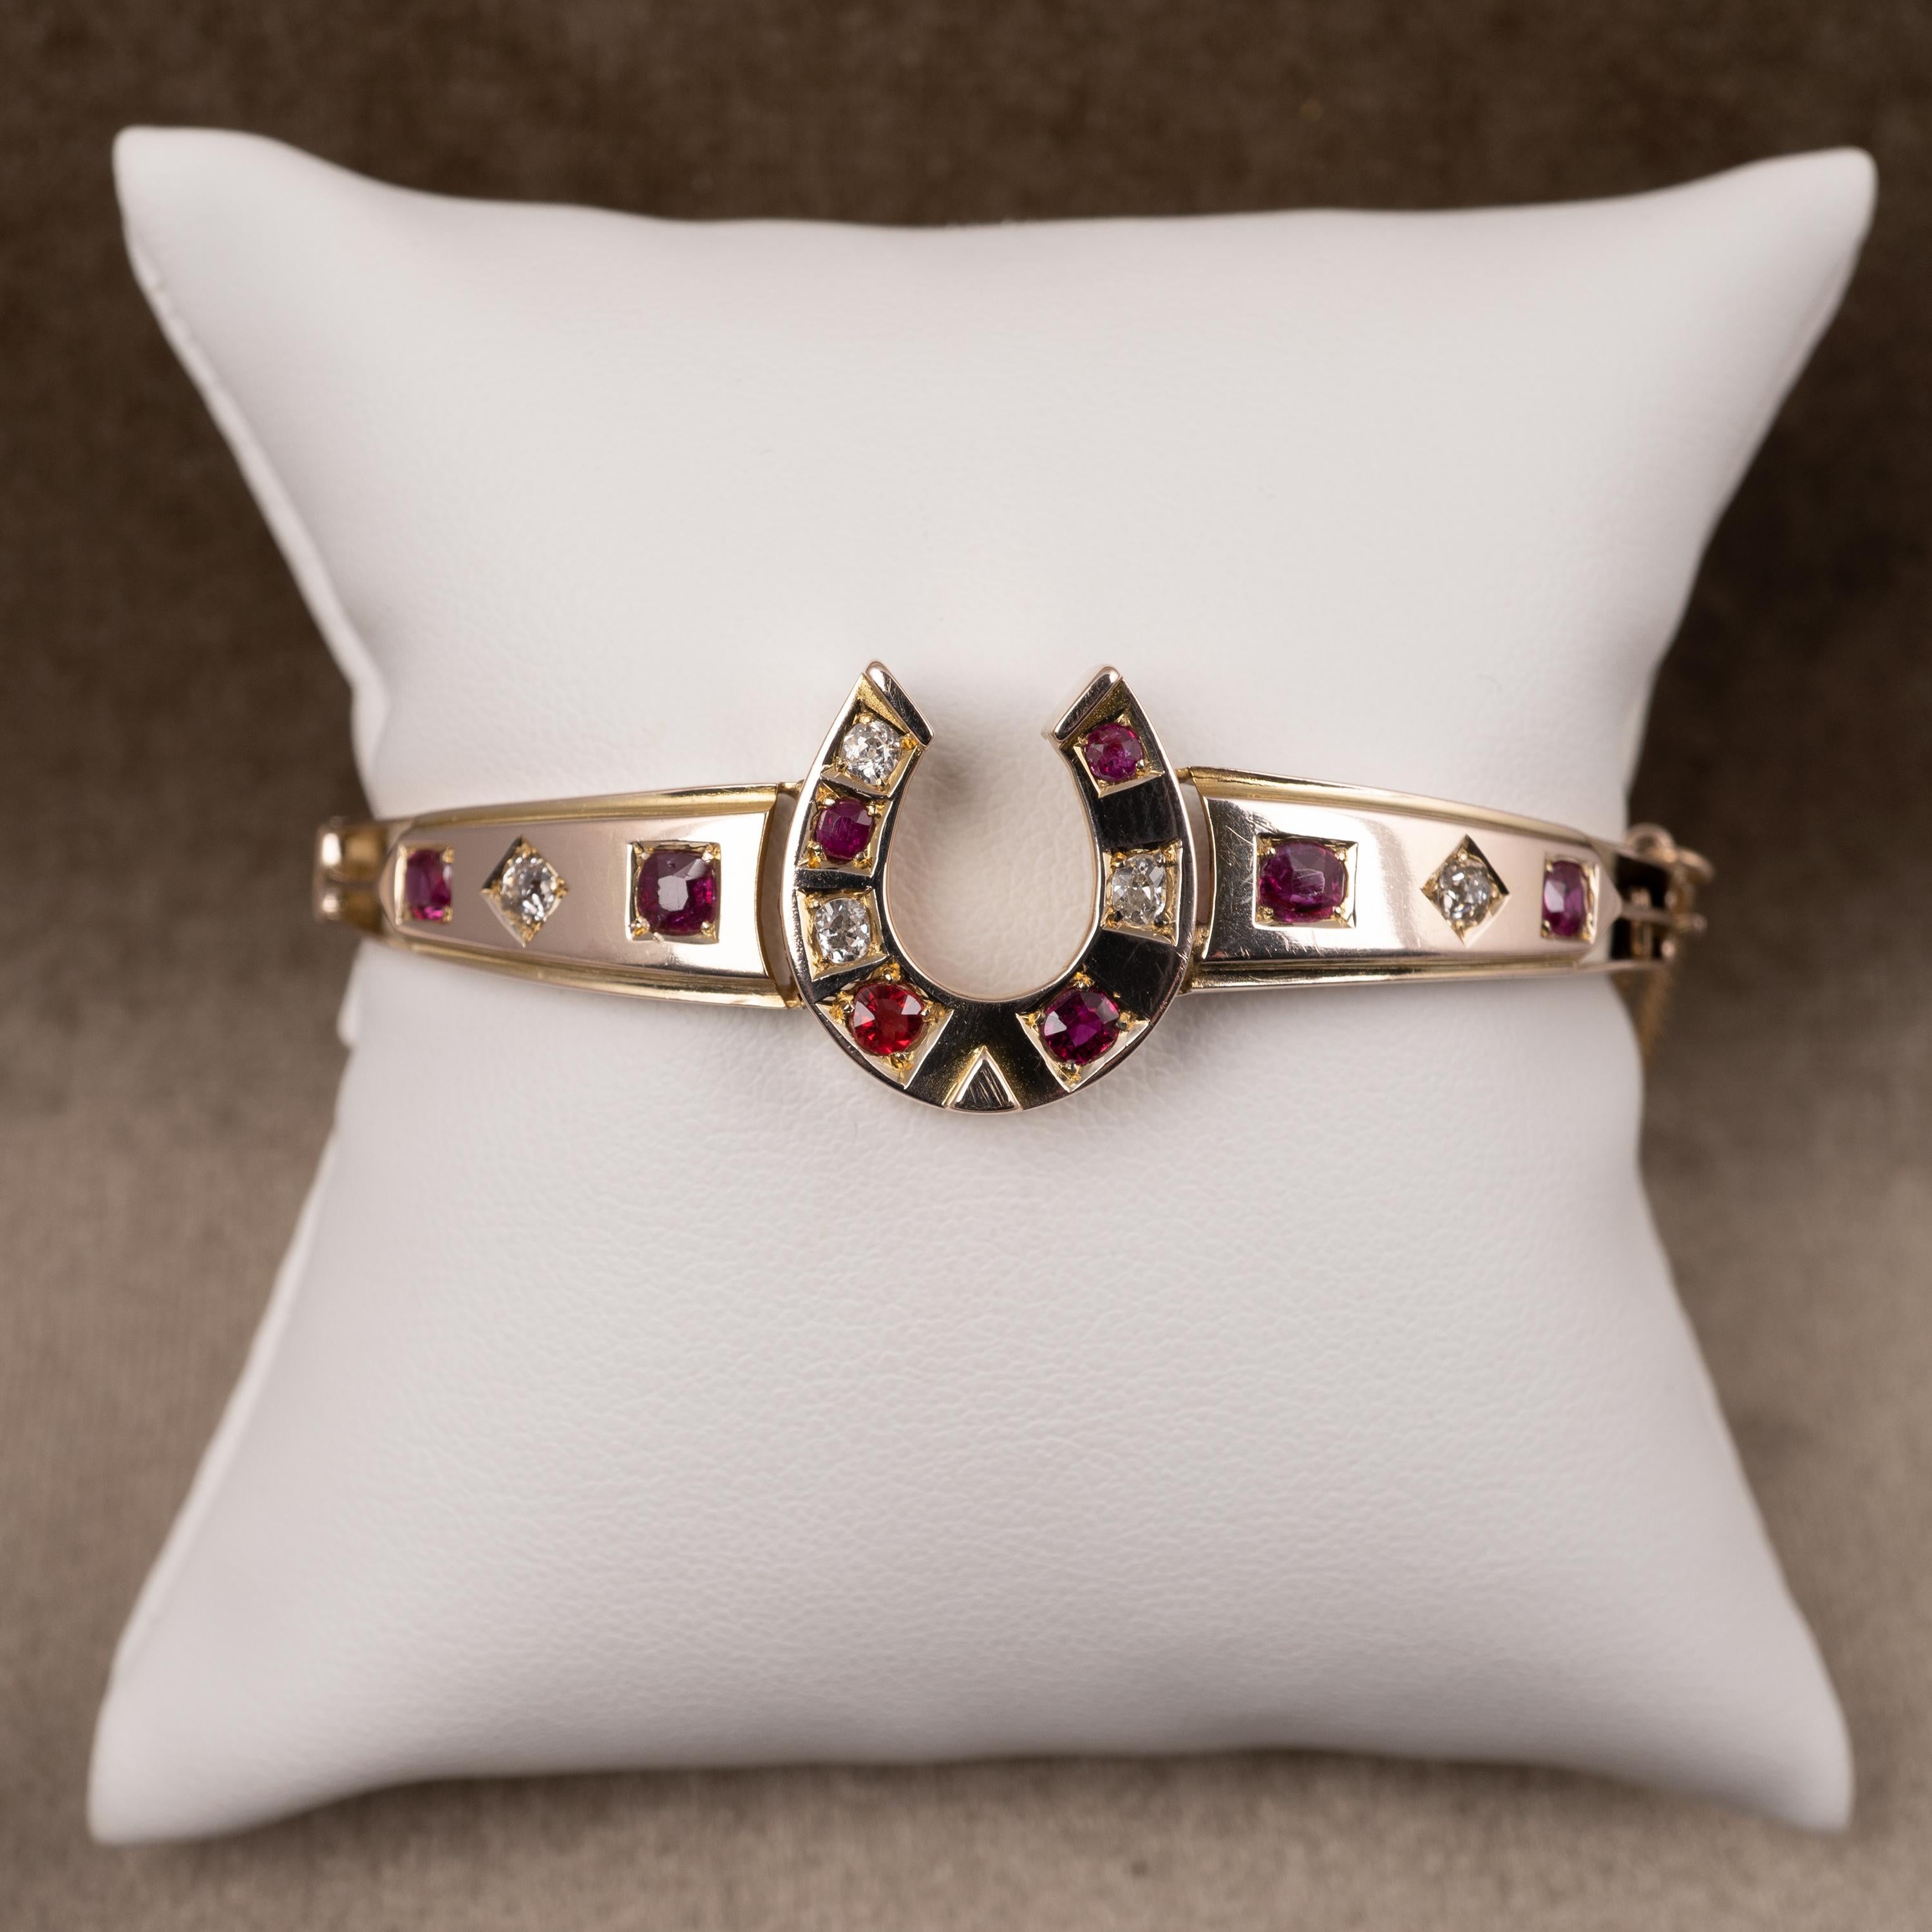 This fabulous antique bangle features European cut diamonds and natural rubies totalling an impressive 1.75 carats. A fabulous collector's piece.

The bangle opens with ease by way of easy trigger catch and the is a small gold safety chain to ensure